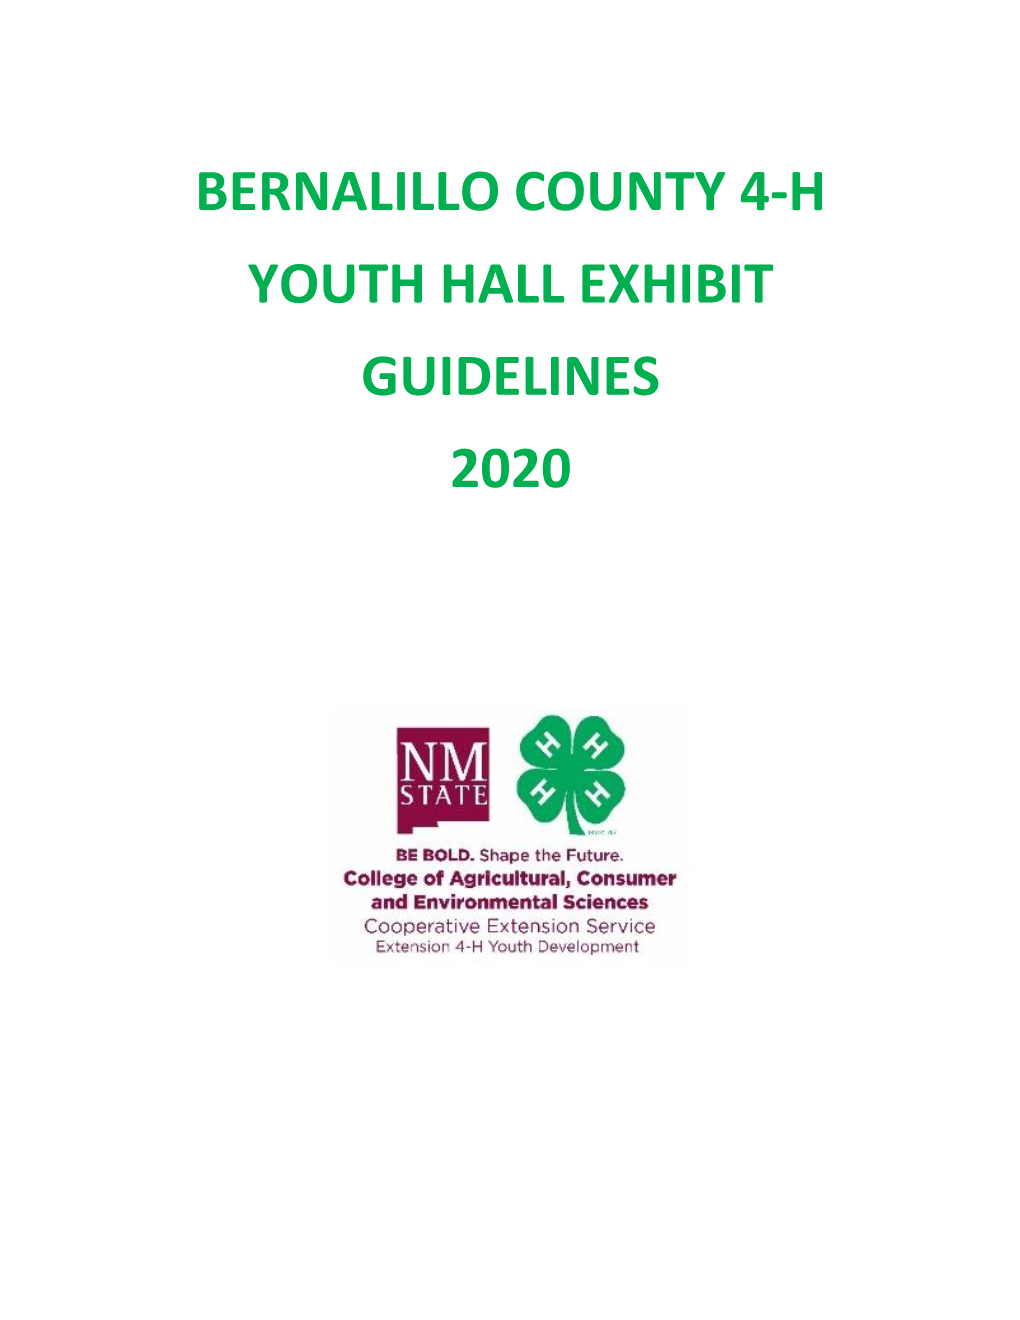 Bernalillo County 4-H Youth Hall Exhibit Guidelines 2020